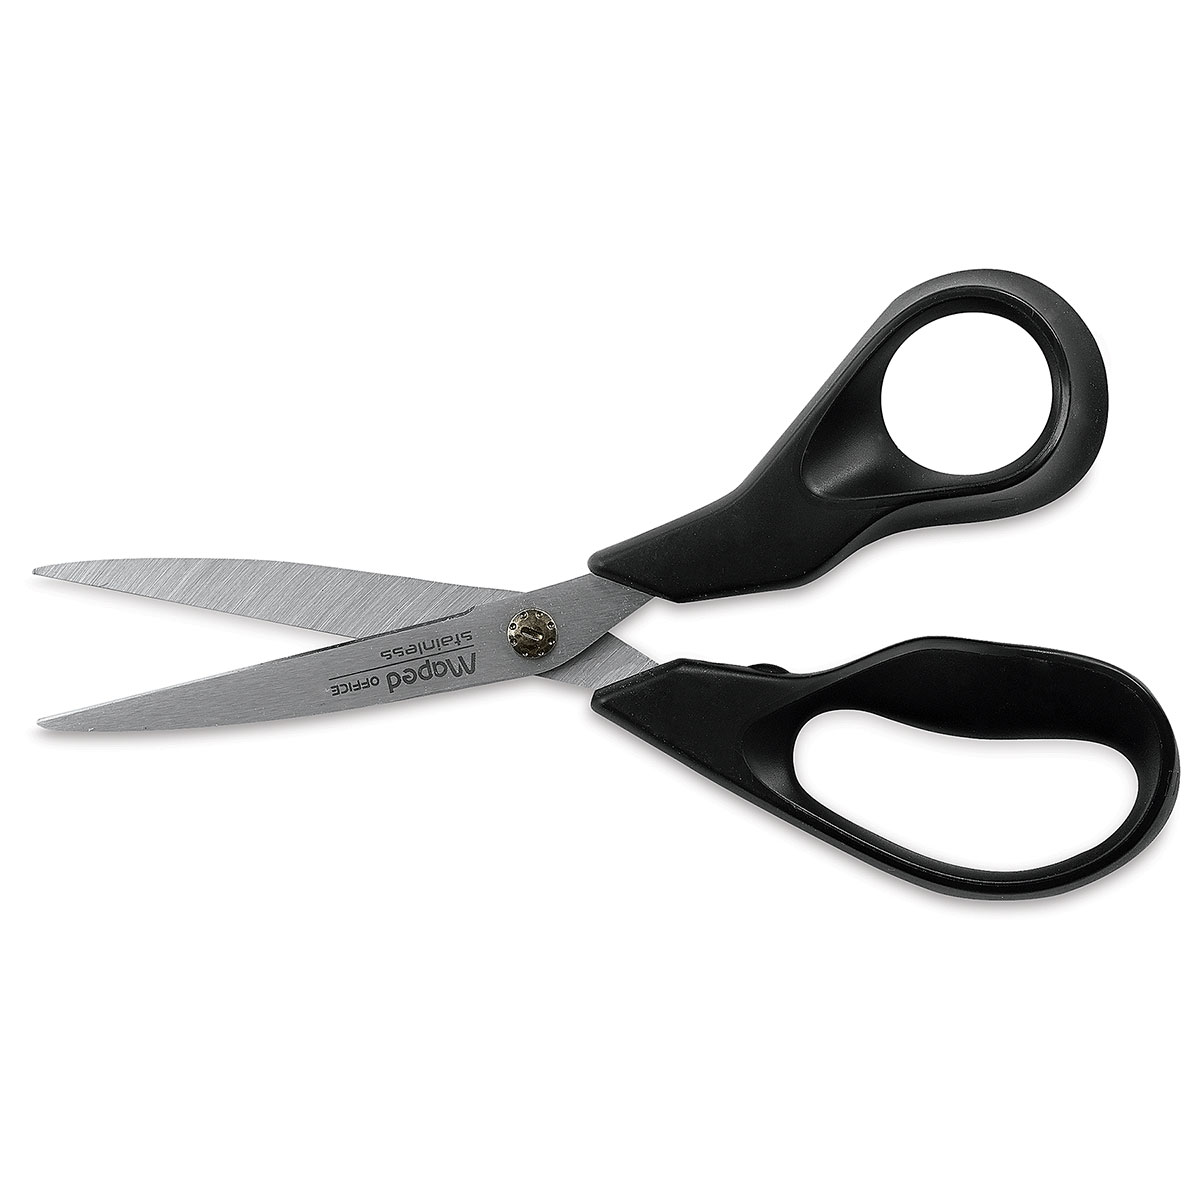 Scissors Bulk black 6-Pack, All Purpose Scissors Stainless Steel Sharp  Scissors for Office Home General Use Craft Supplies, High/Middle School